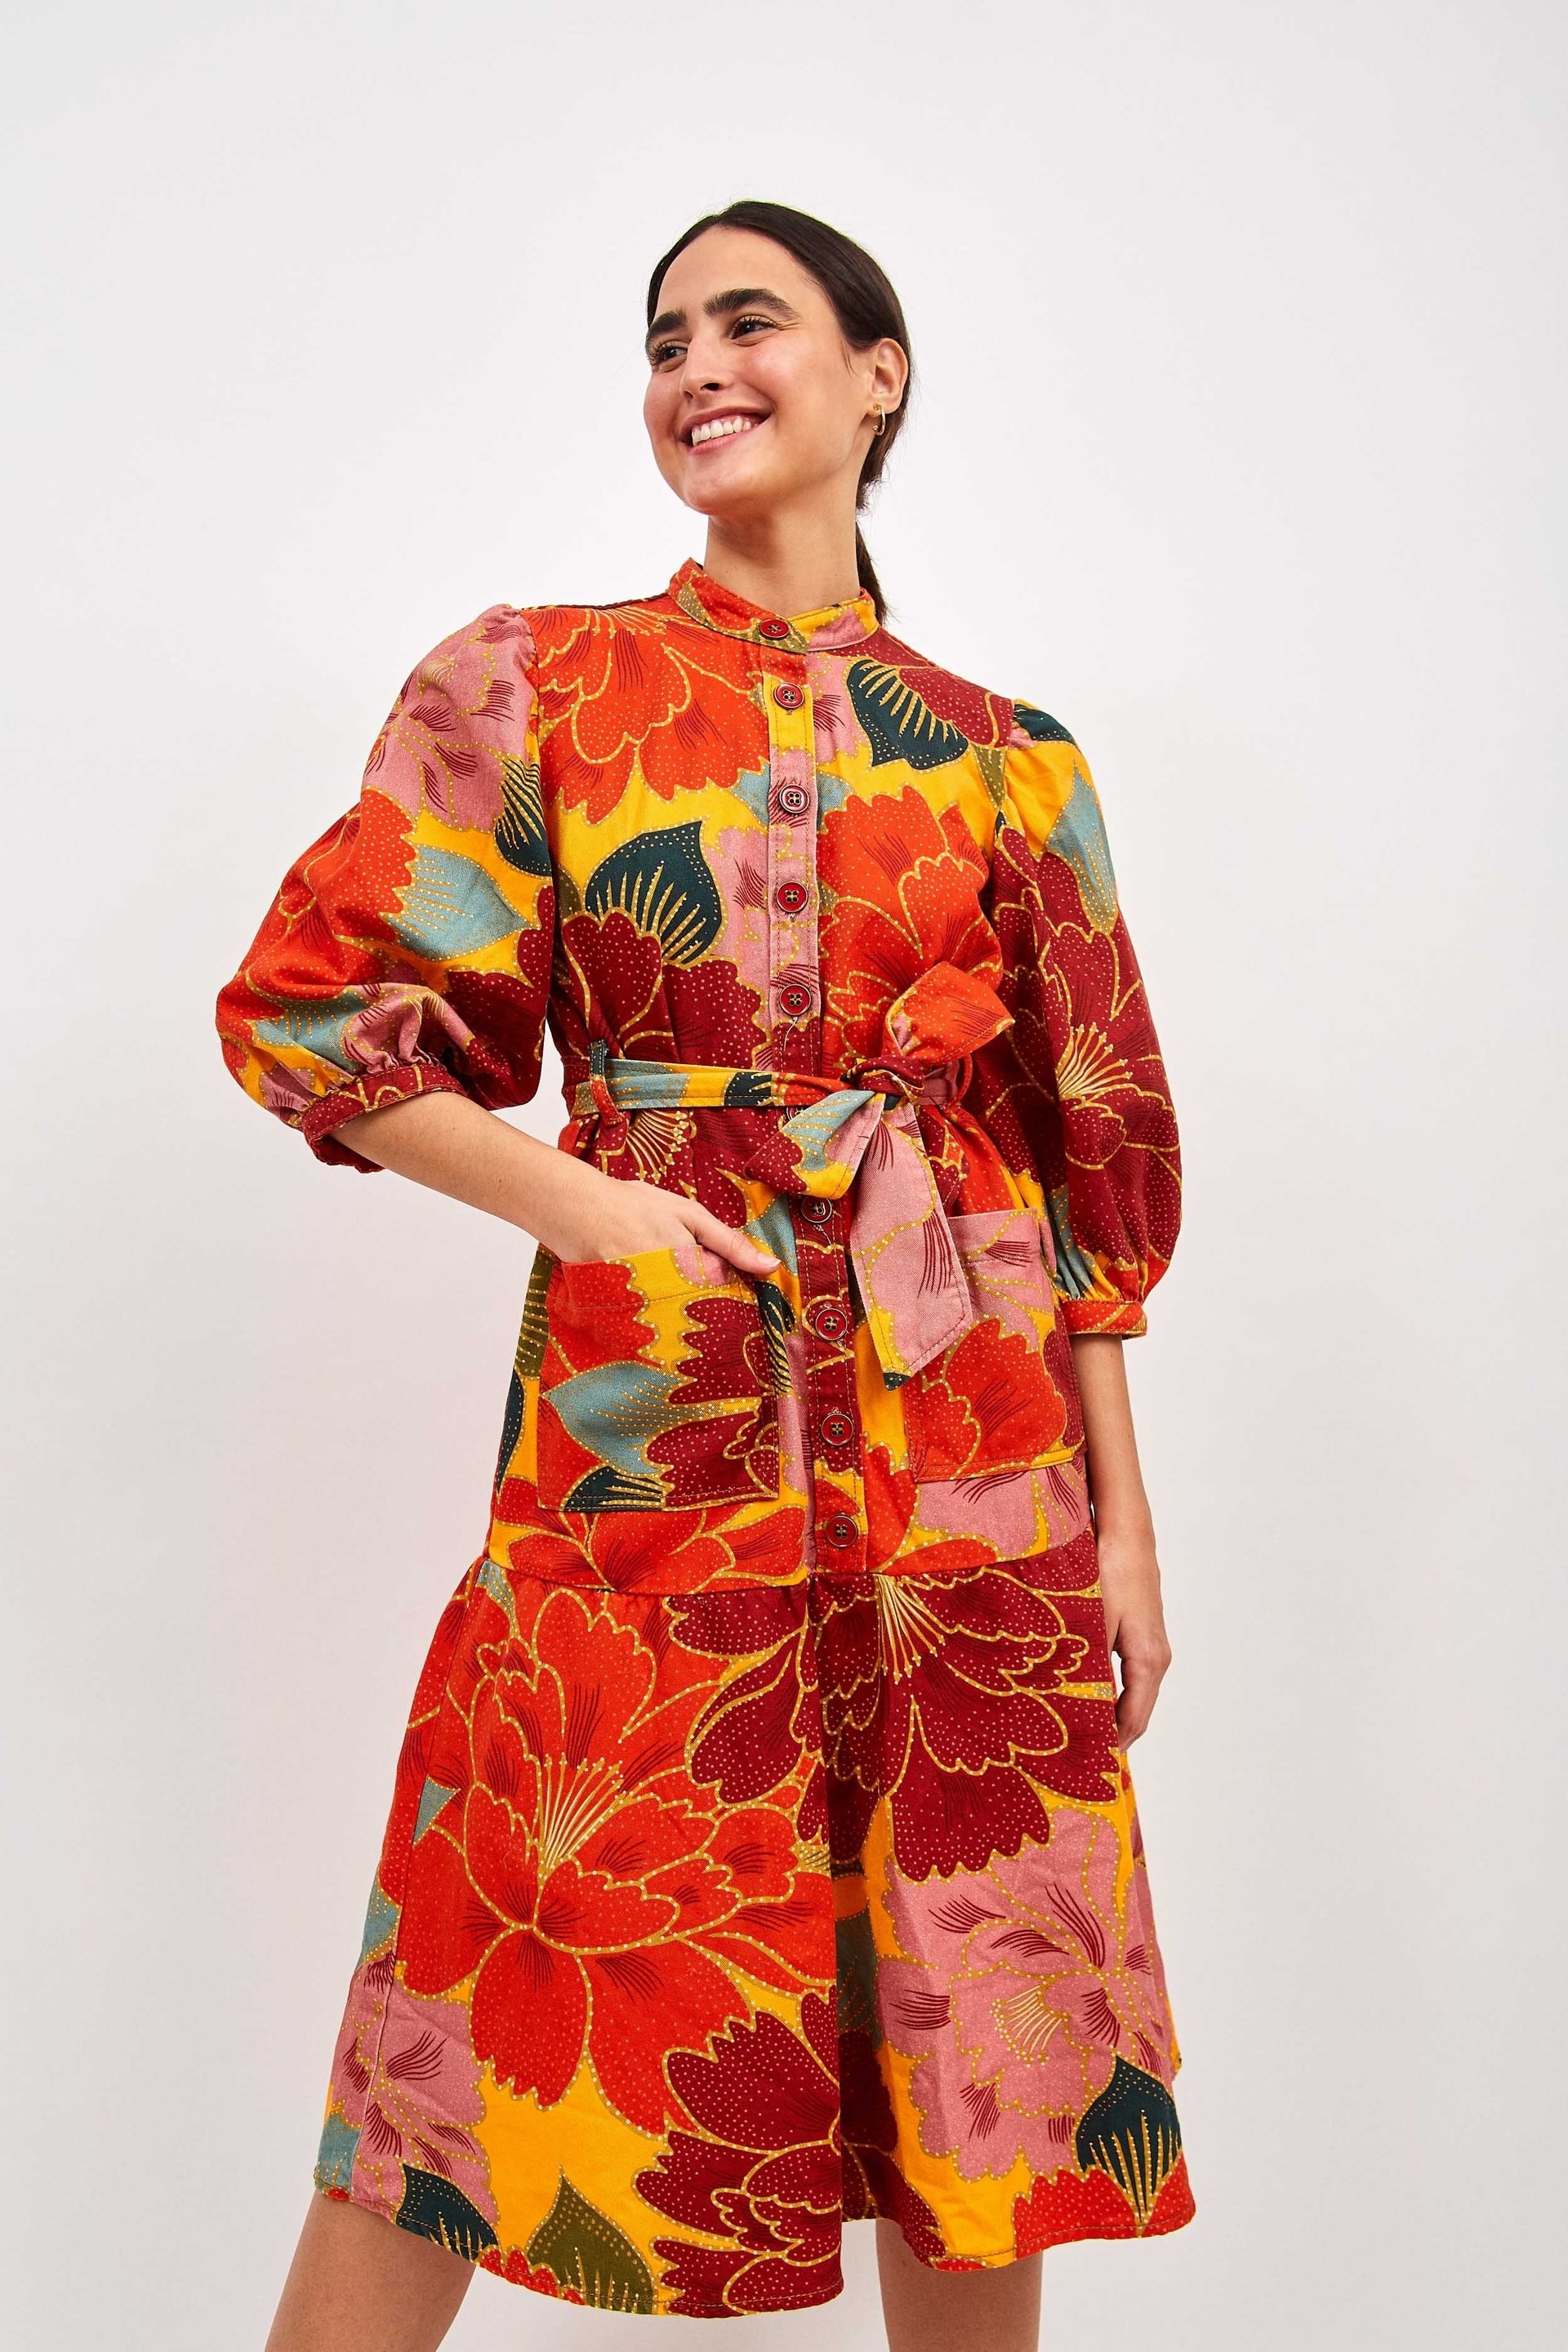 model wearing a super colorful floral dress with button up detailing and a tie waist